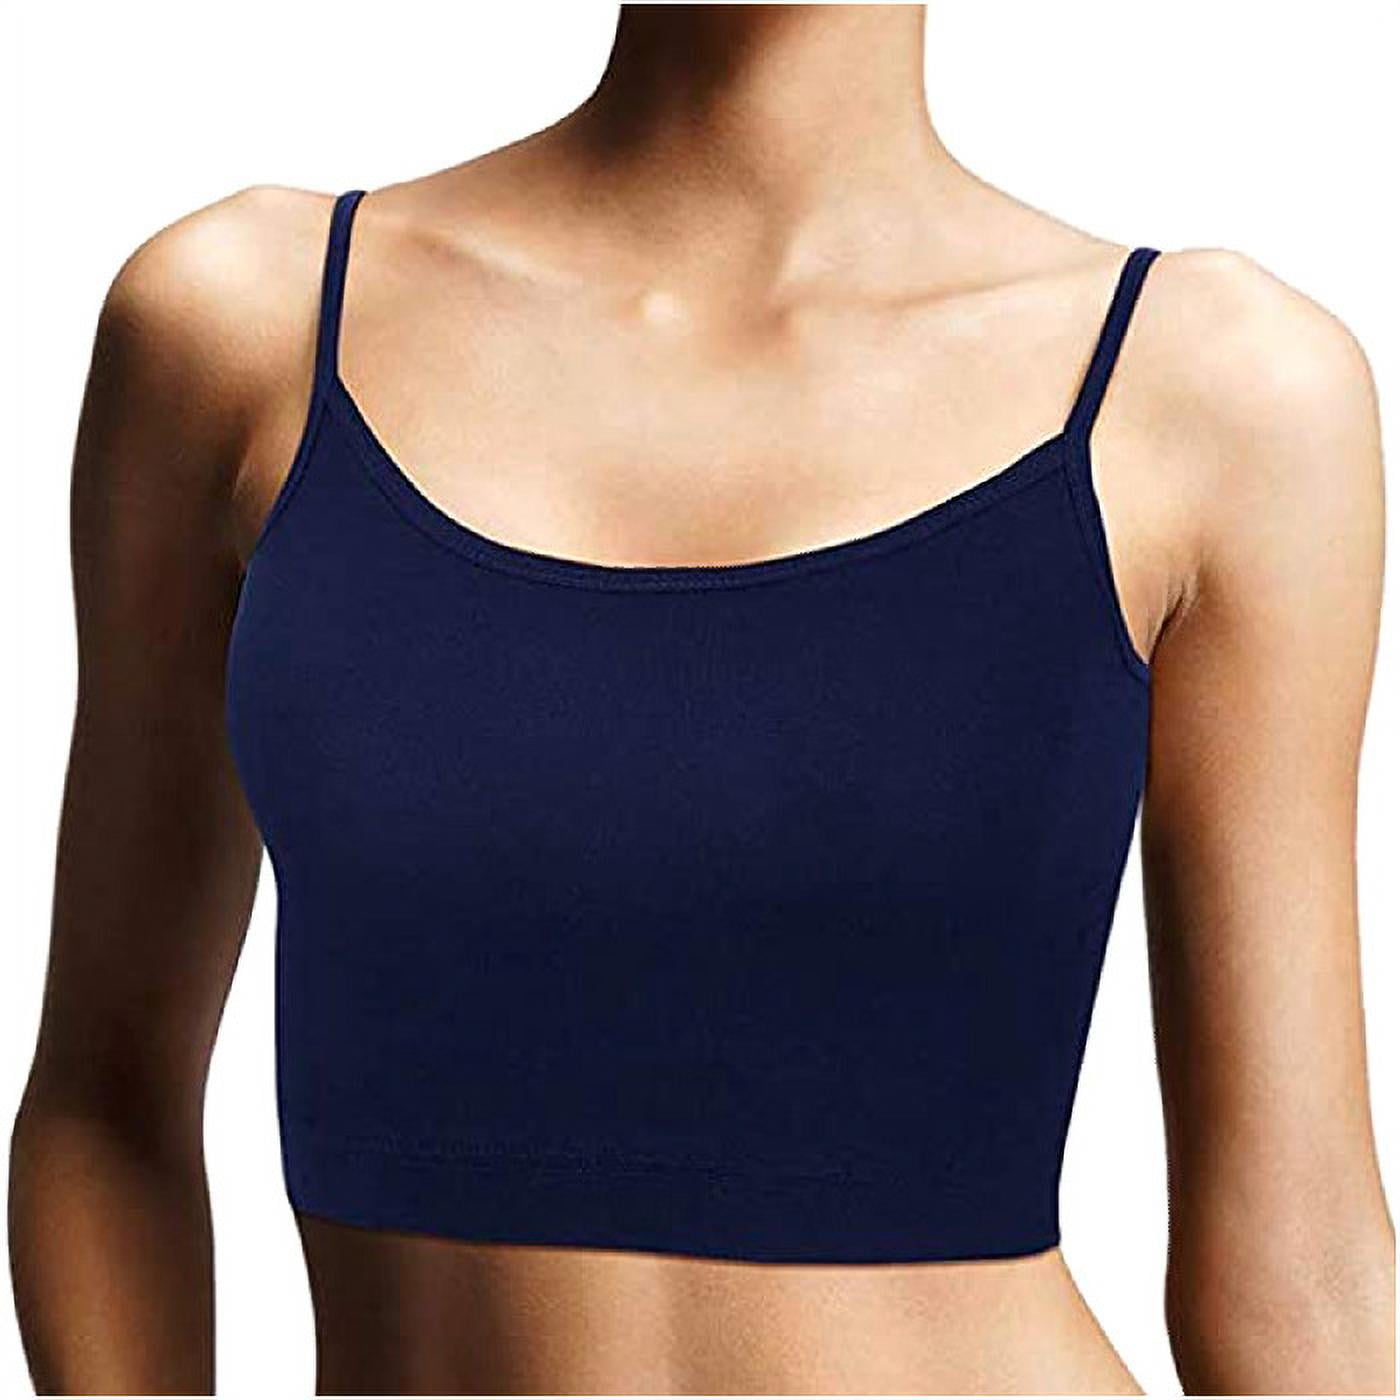 Workout Tank Tops With Built In Bra Light Blue Nylon 1PC Camisole For Women  XL